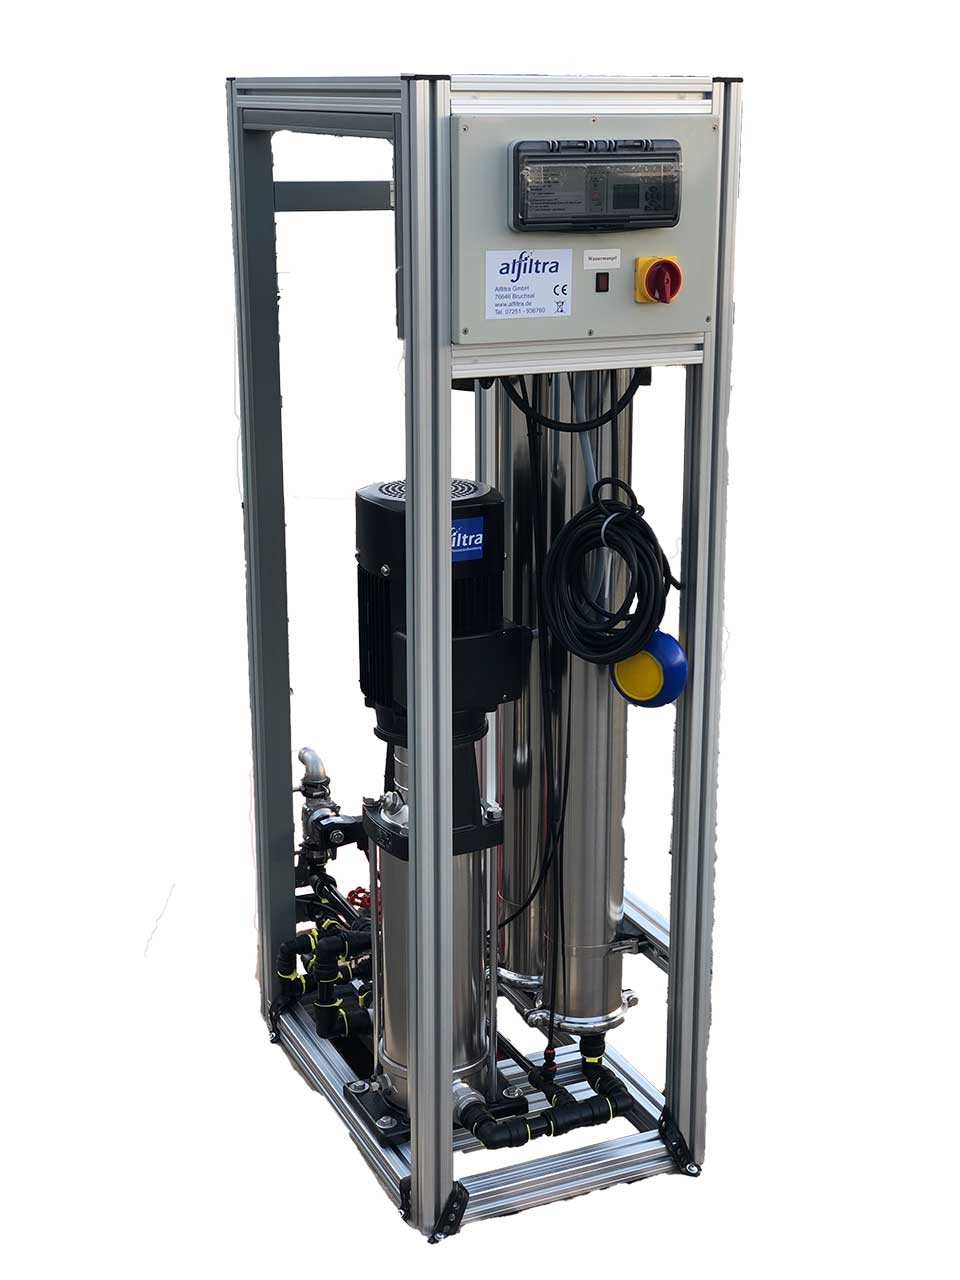 Crystal Pro reverse osmosis system